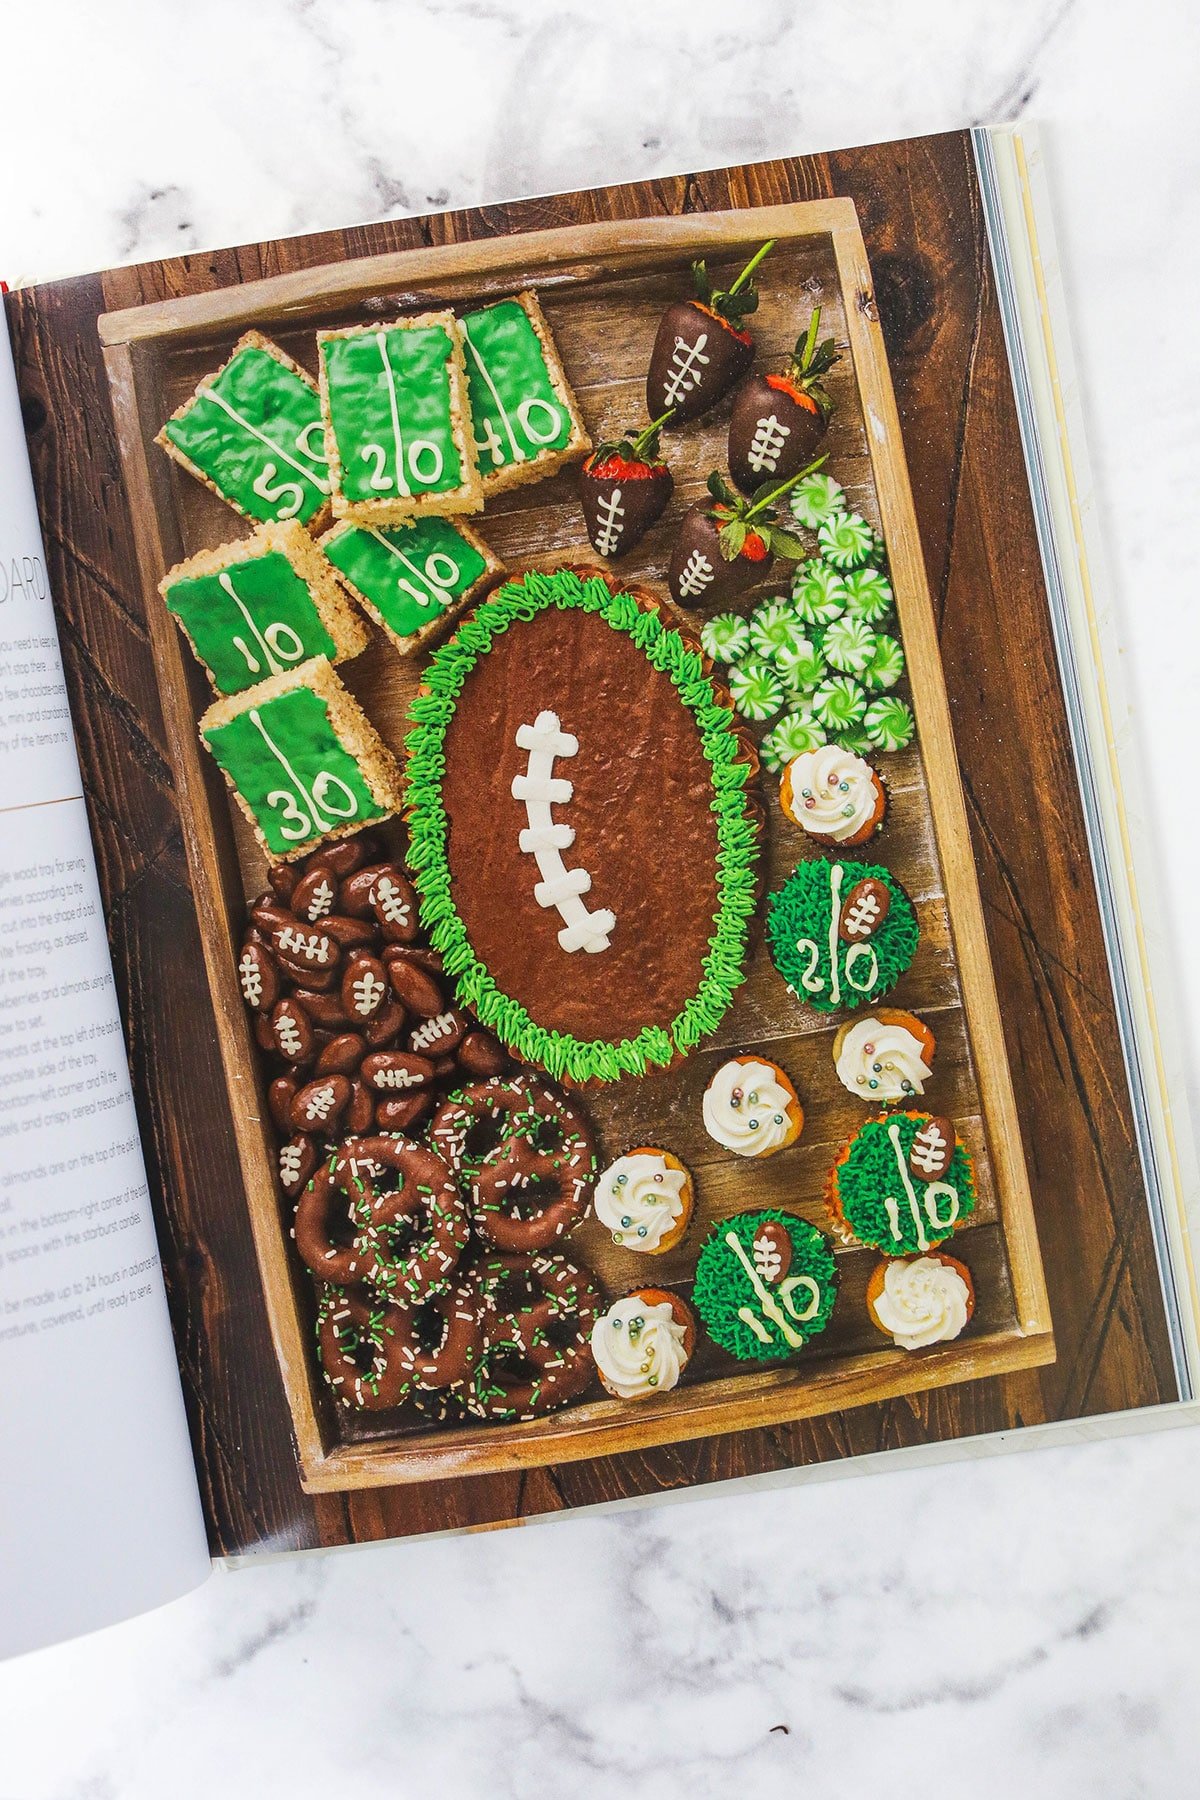 image of the picture of the game day dessert board from the book "Dessert Boards"